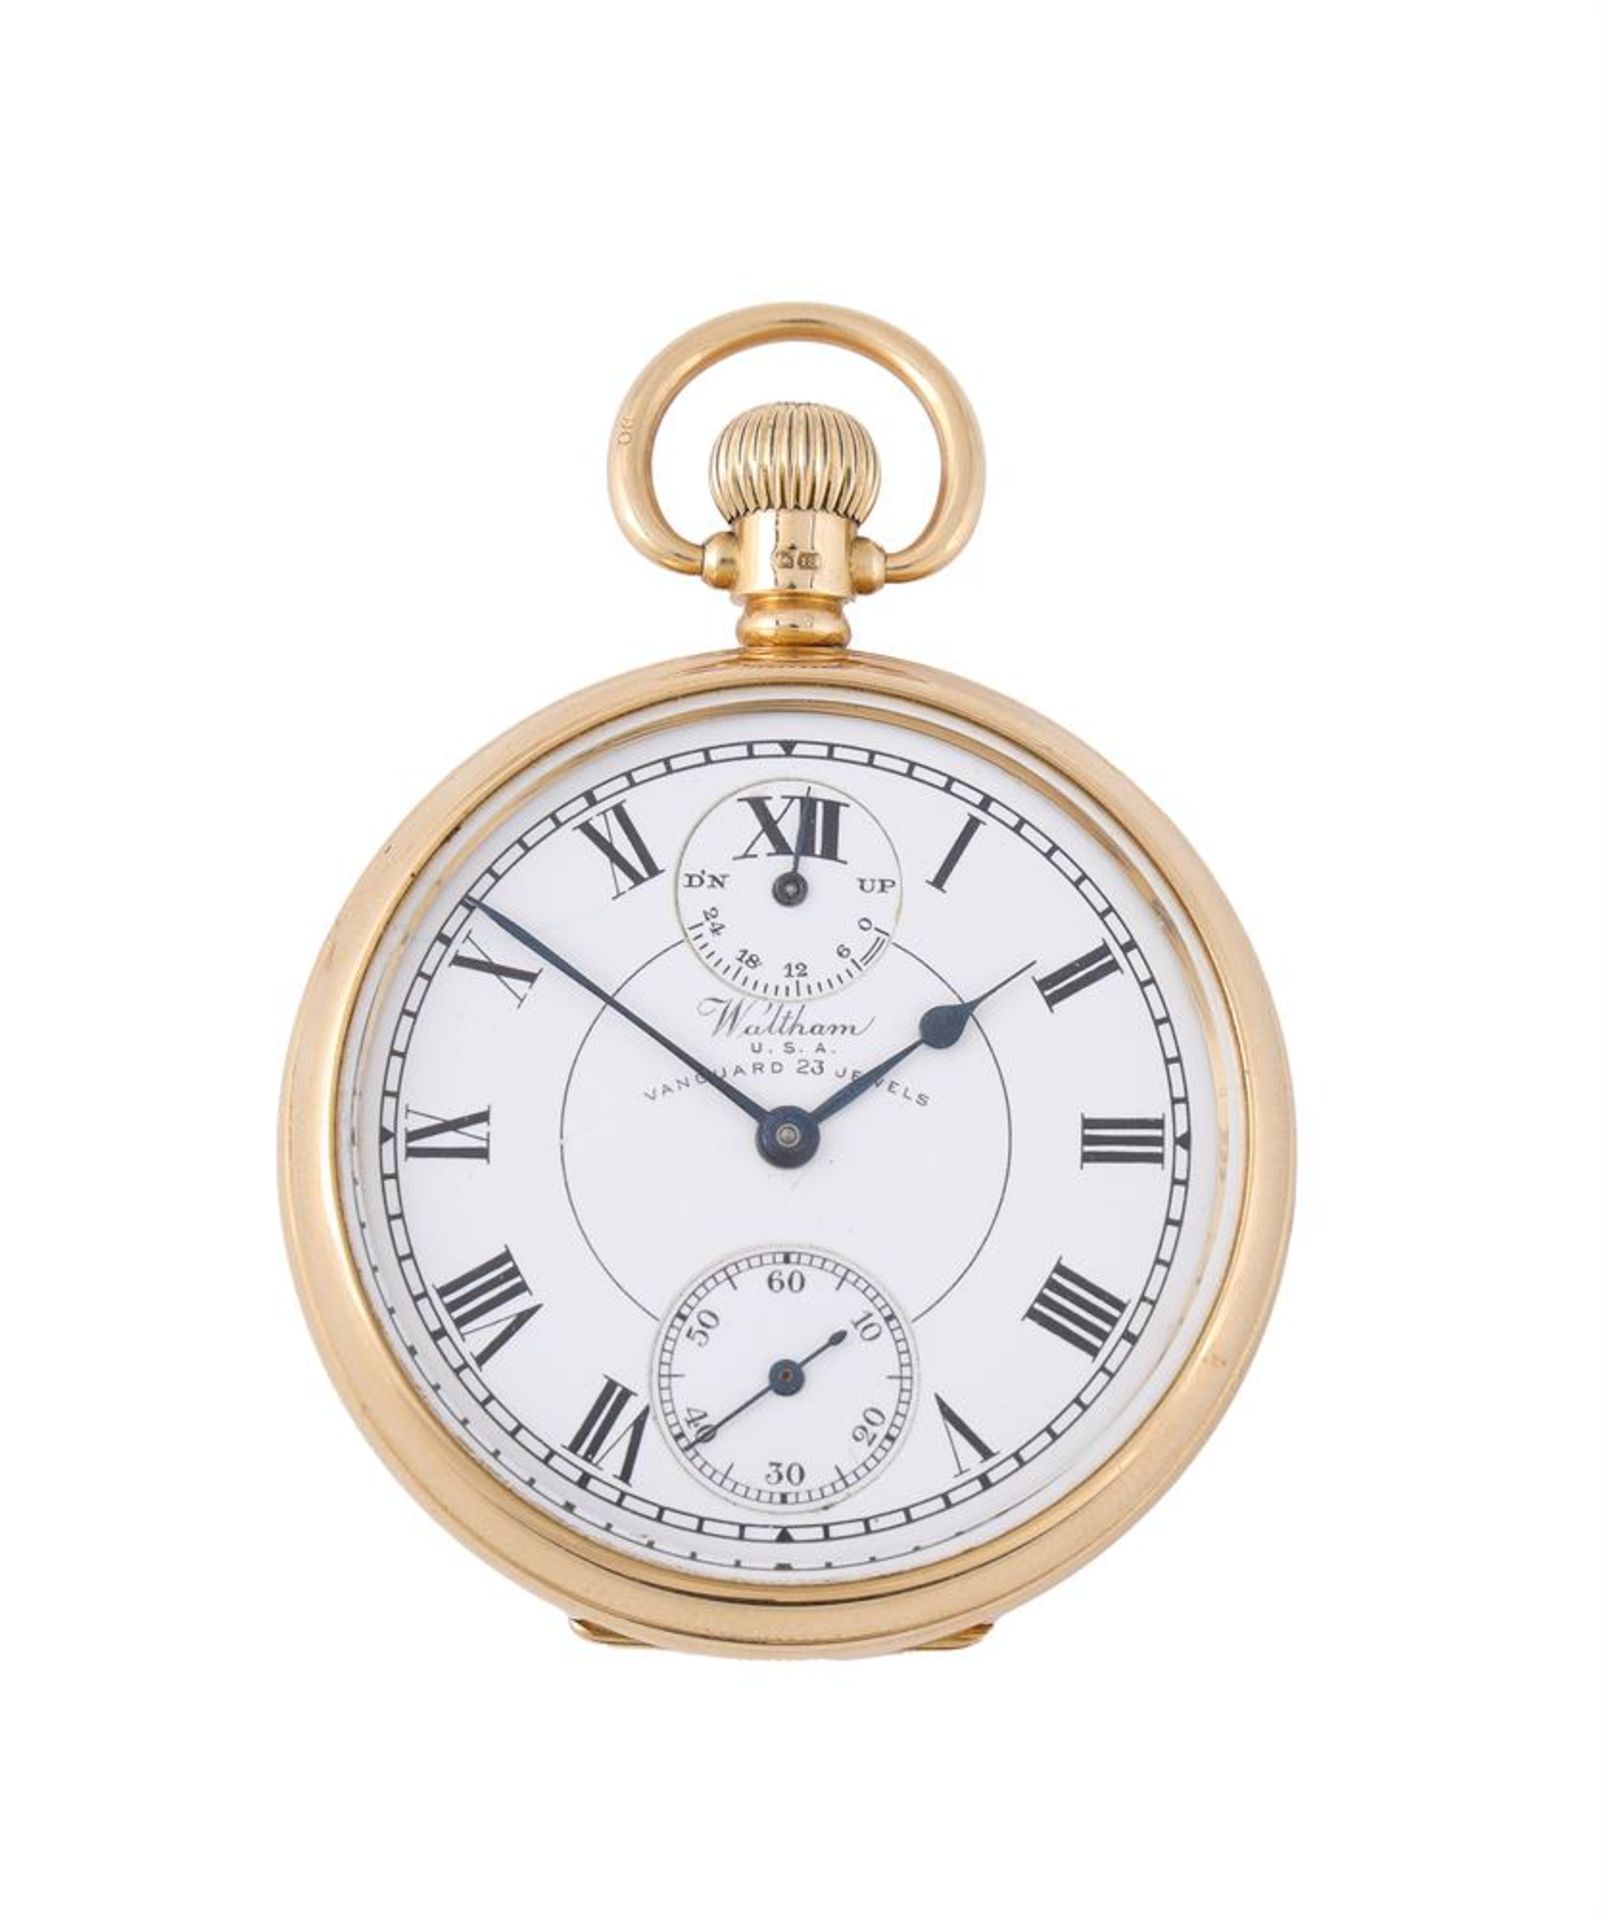 WALTHAM, U.S.A, AN 18 CARAT GOLD KEYLESS WIND OPEN FACE POCKET WATCH WITH UP/DOWN INDICATOR